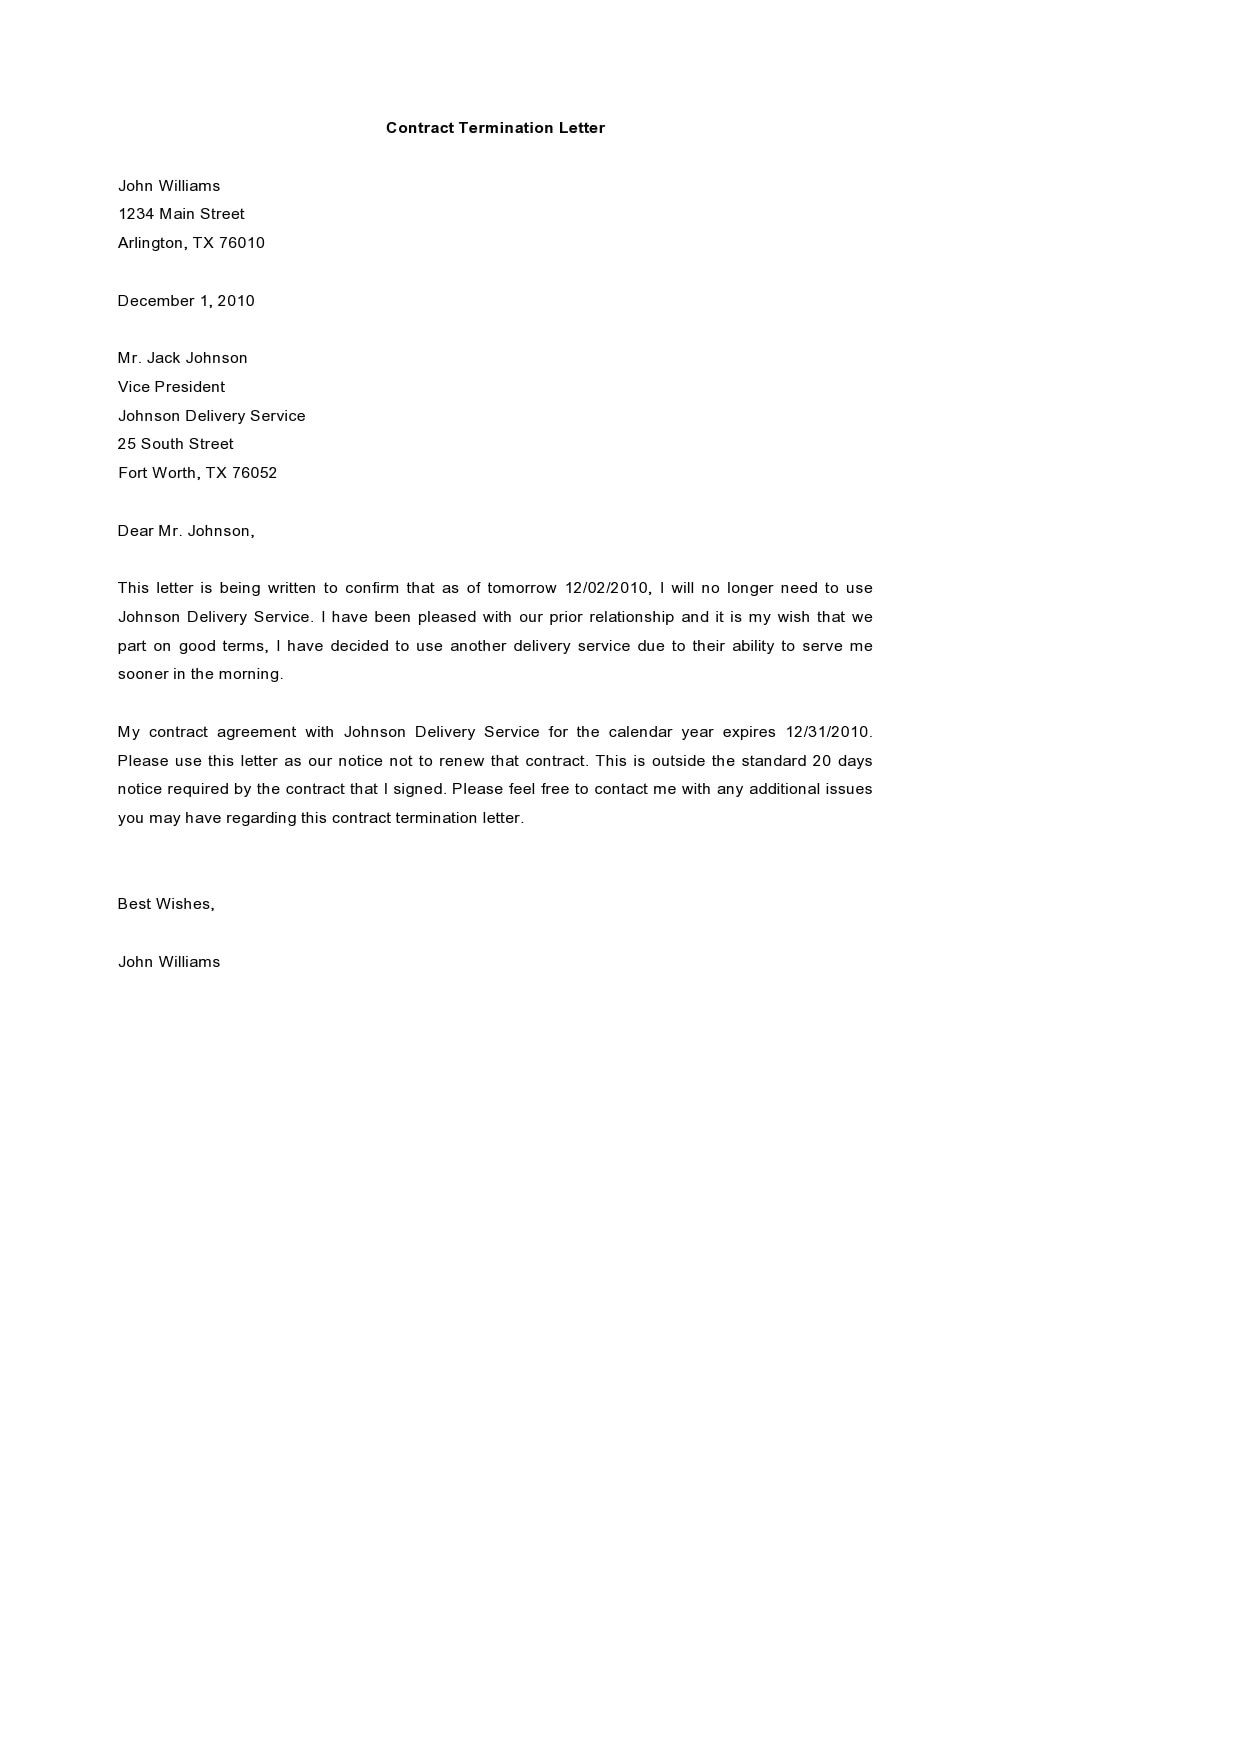 Free Breach Of Contract Letter Template from templatearchive.com